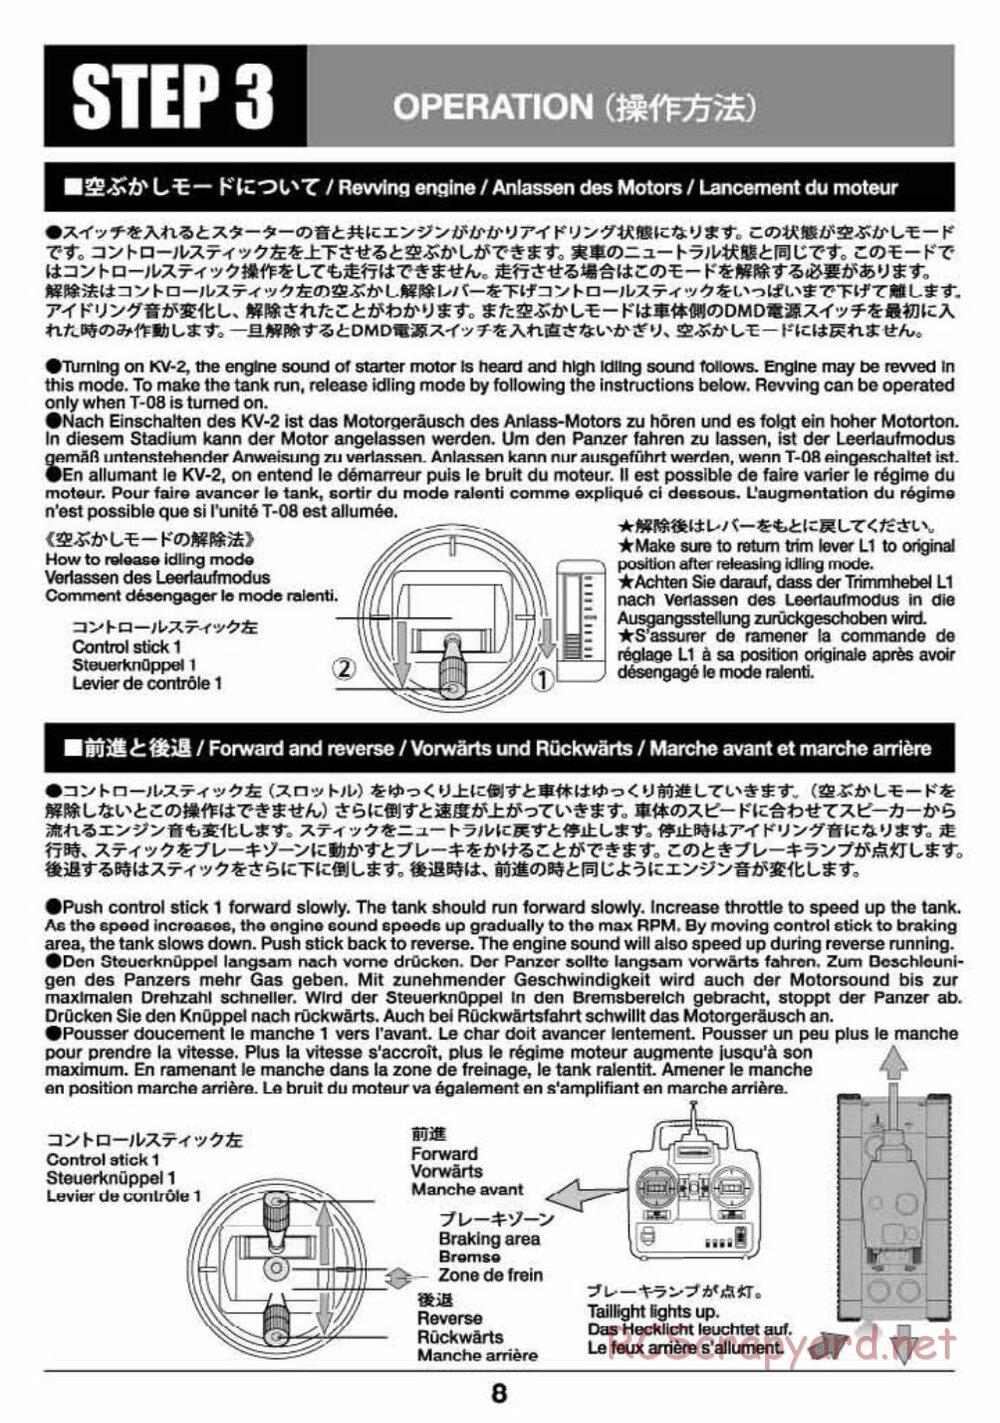 Tamiya - Russian Heavy Tank KV-2 Gigant - 1/16 Scale Chassis - Operation Manual - Page 8